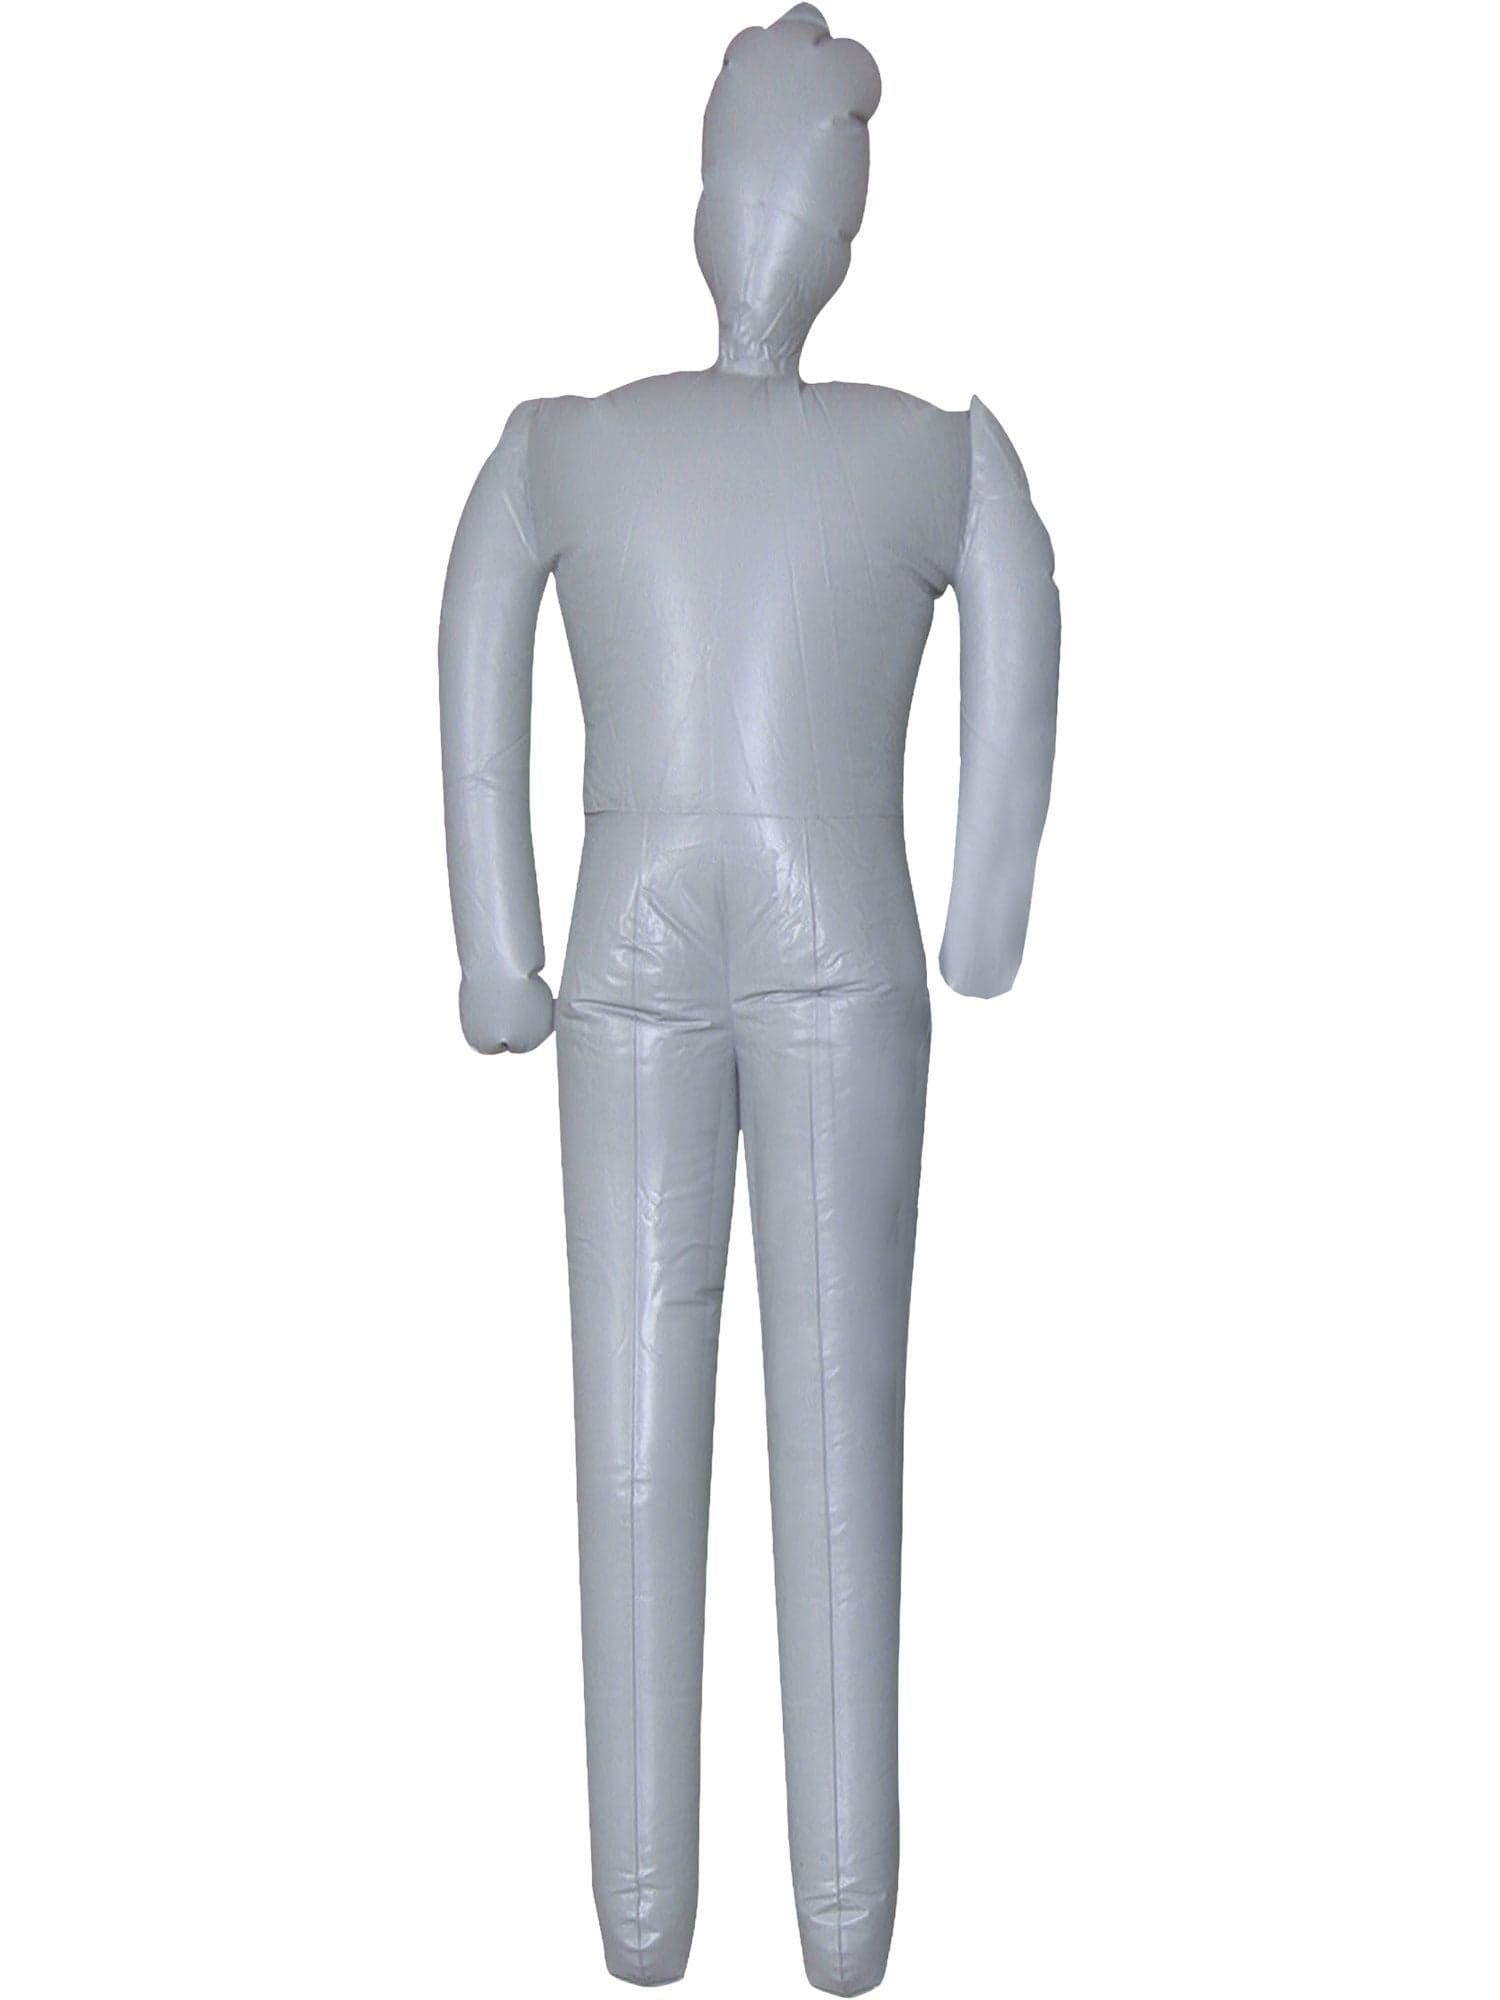 Male Inflatable Body Form - costumes.com